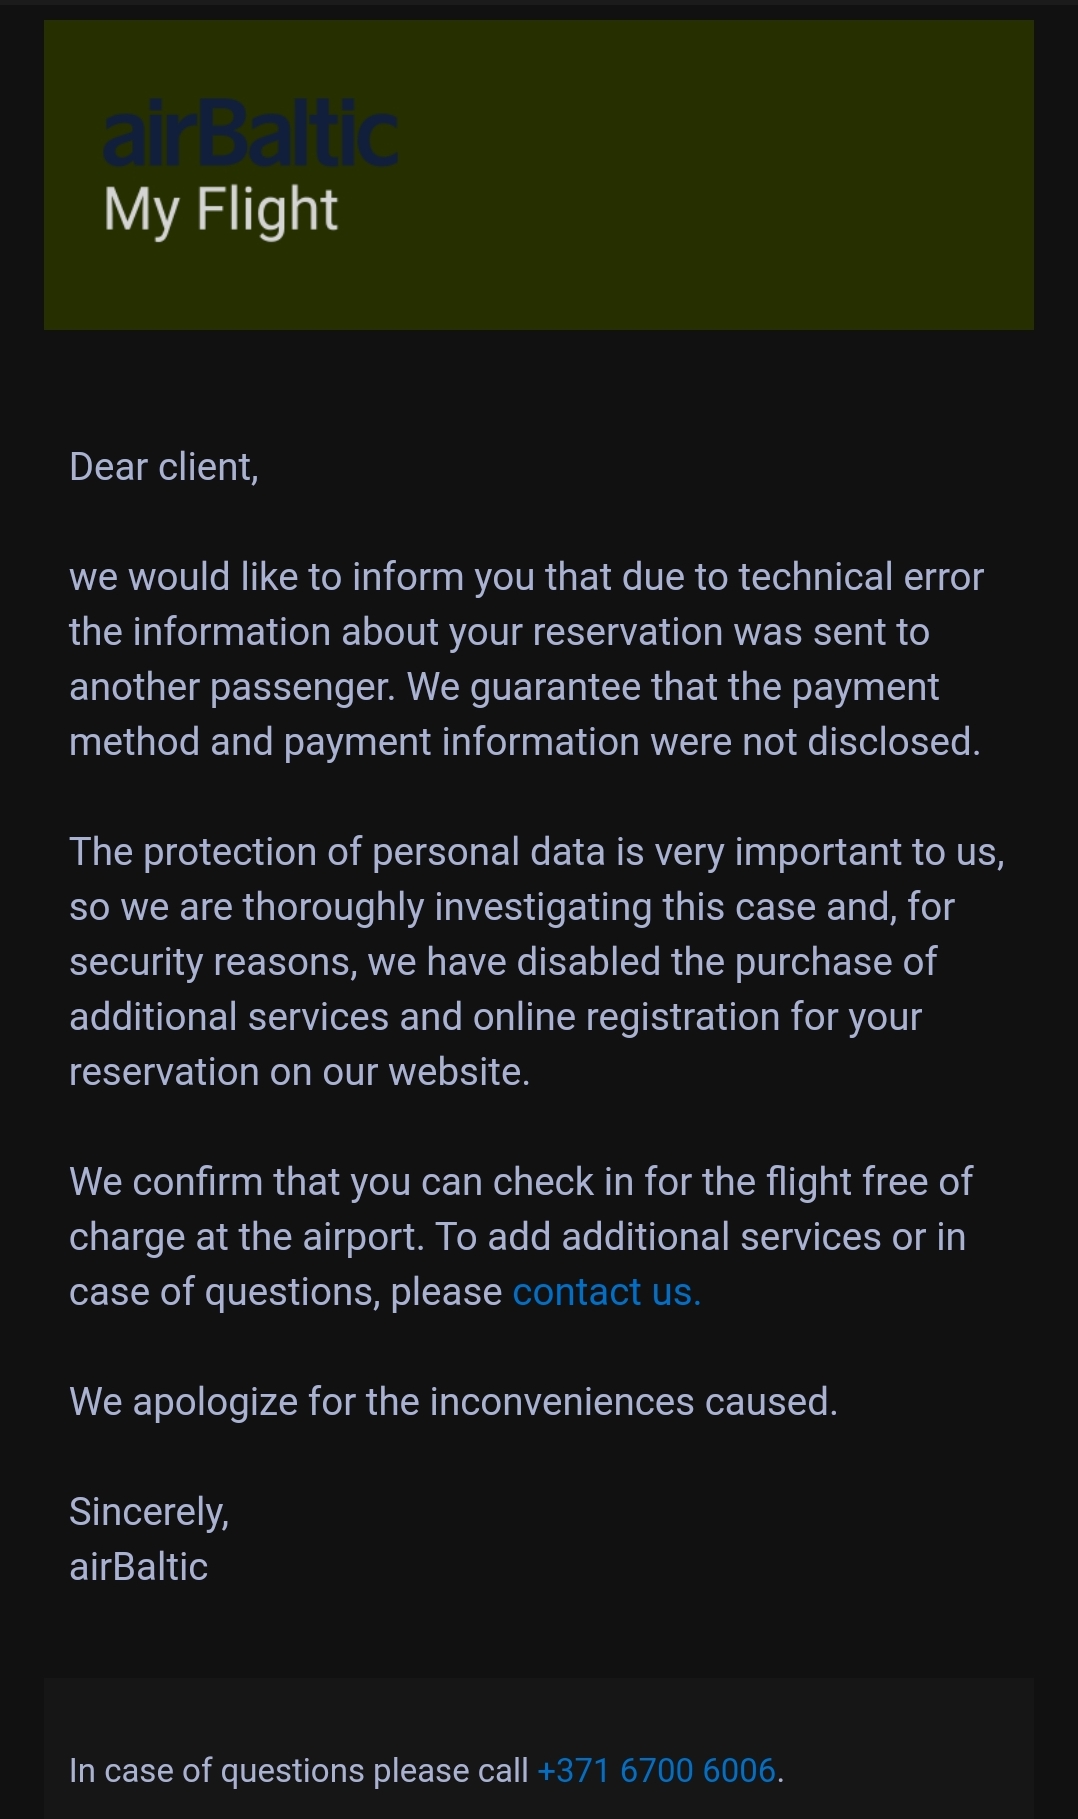 airBaltic email to customers